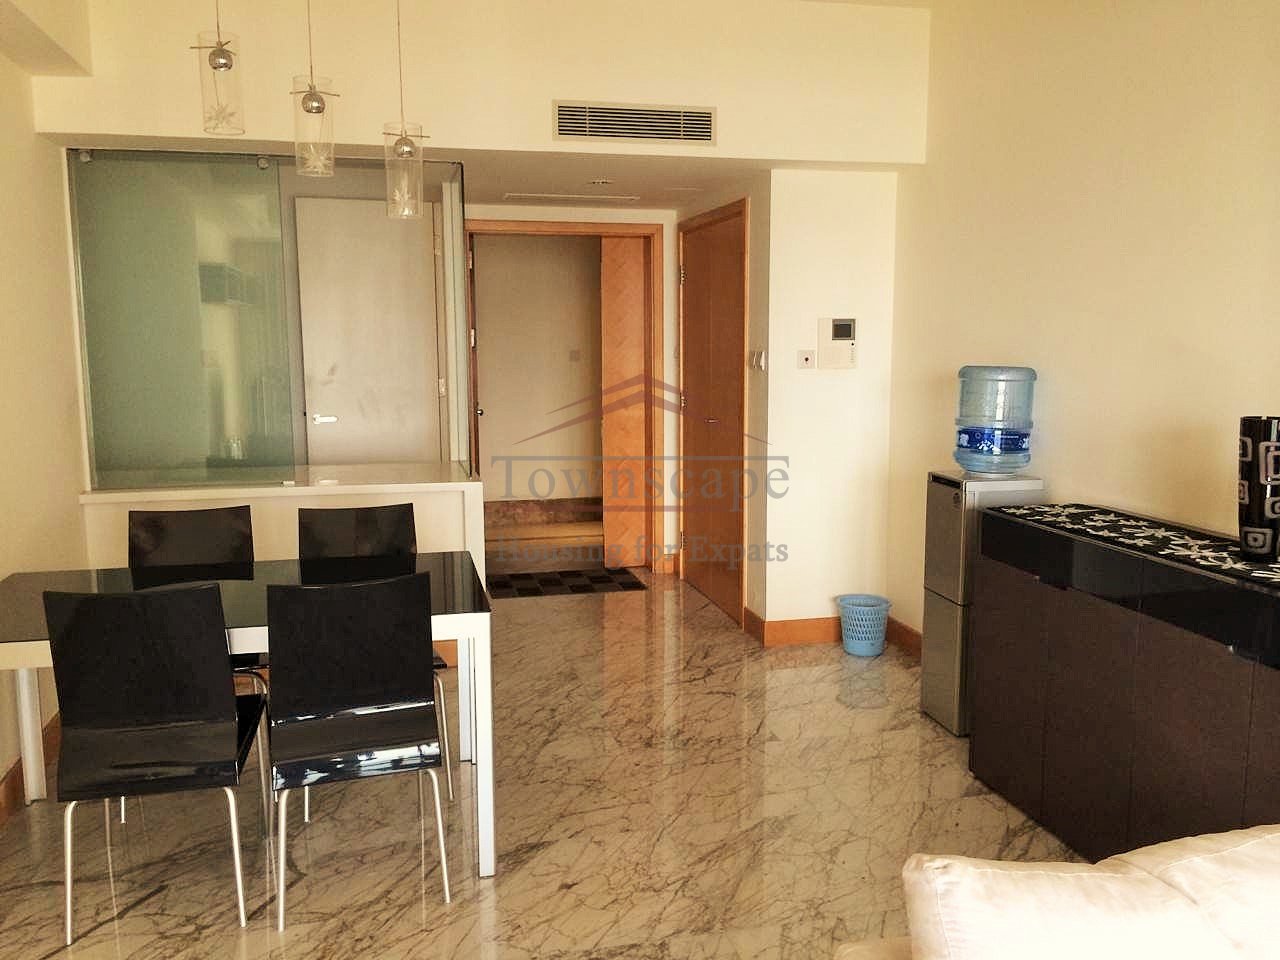 Shanghai apartment to rent west Nanjing road Lovely 2 BR apartment in shanghai downtown area